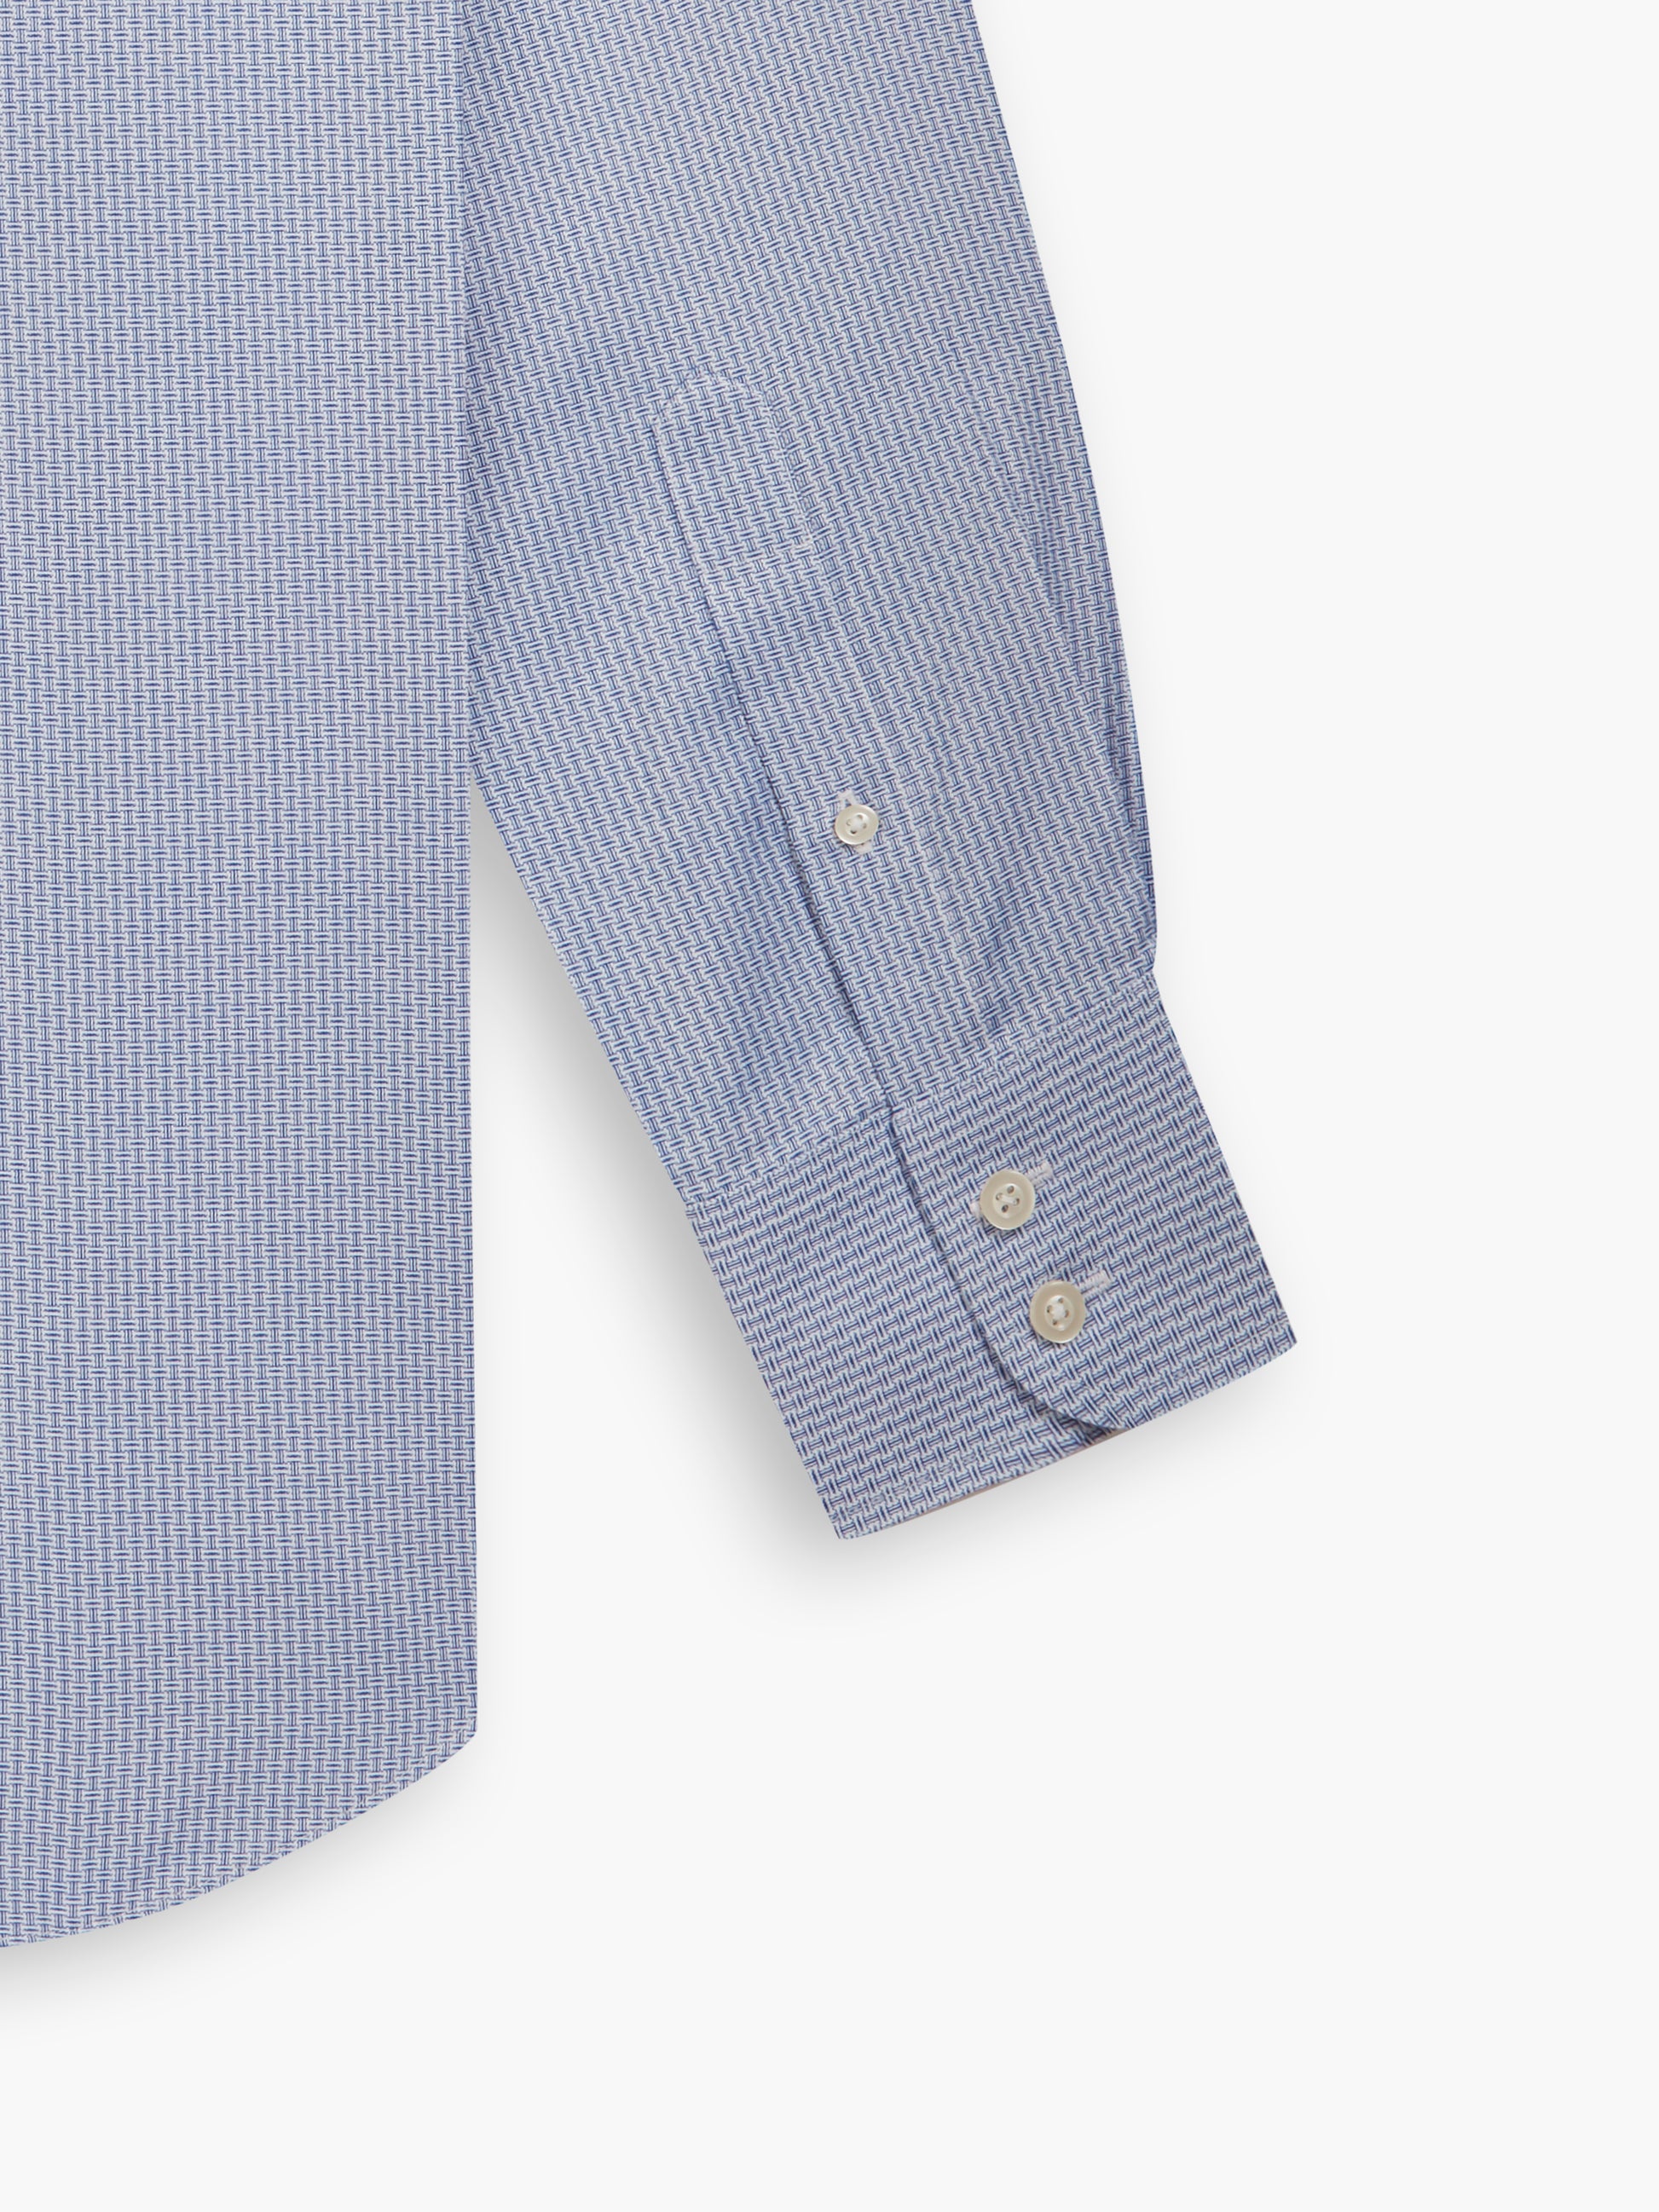 Image 3 of Non-Iron Navy Blue Brick Geometric Dobby Super Fitted Single Cuff Classic Collar Shirt